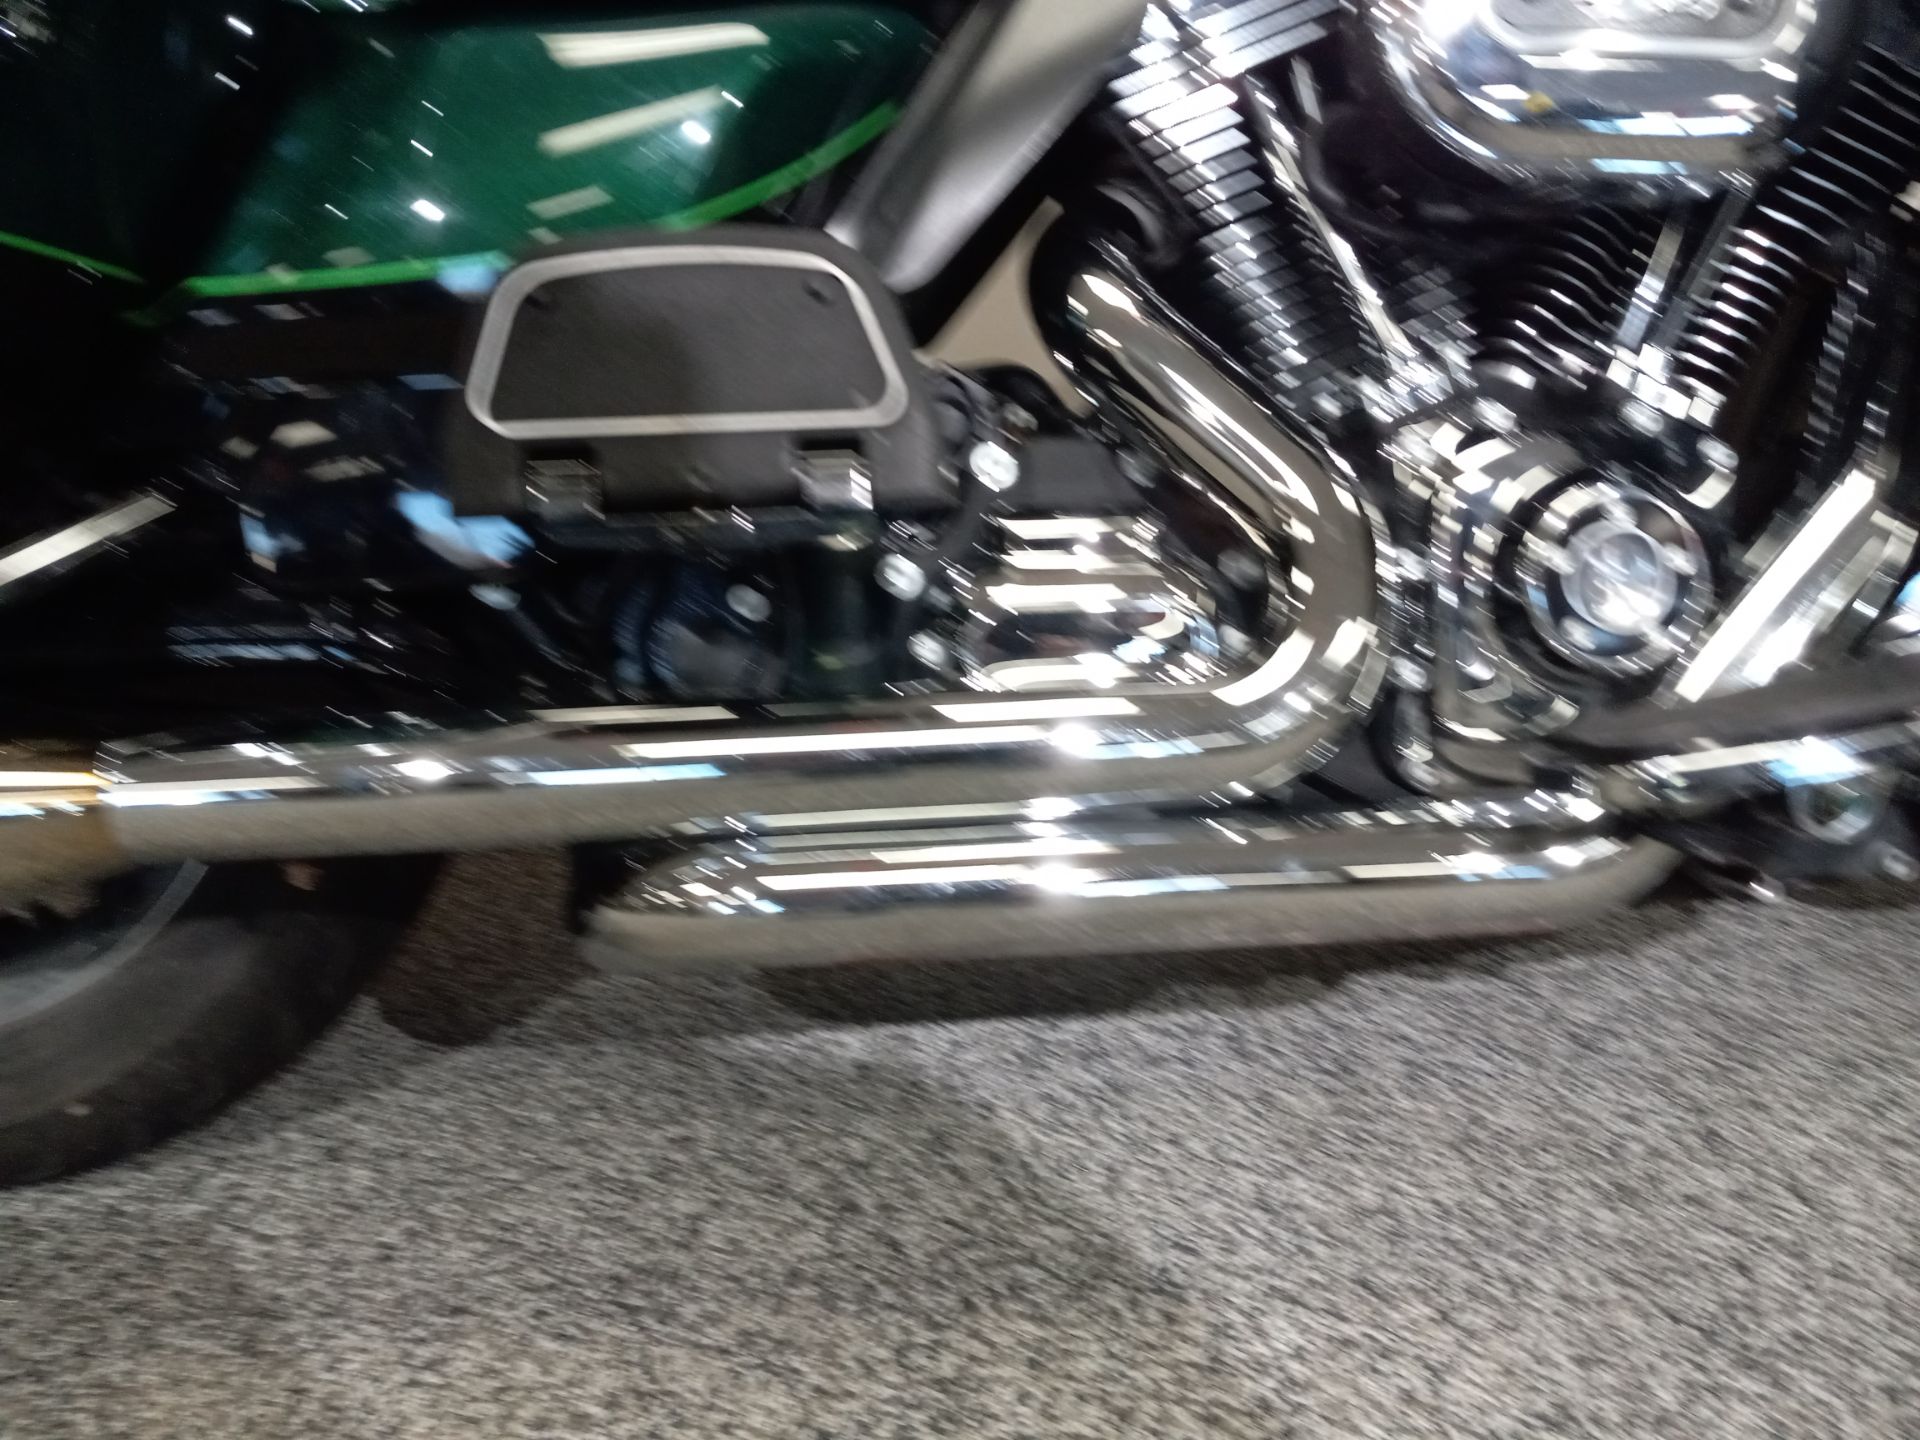 2015 Harley-Davidson Ultra Limited Low in Knoxville, Tennessee - Photo 7